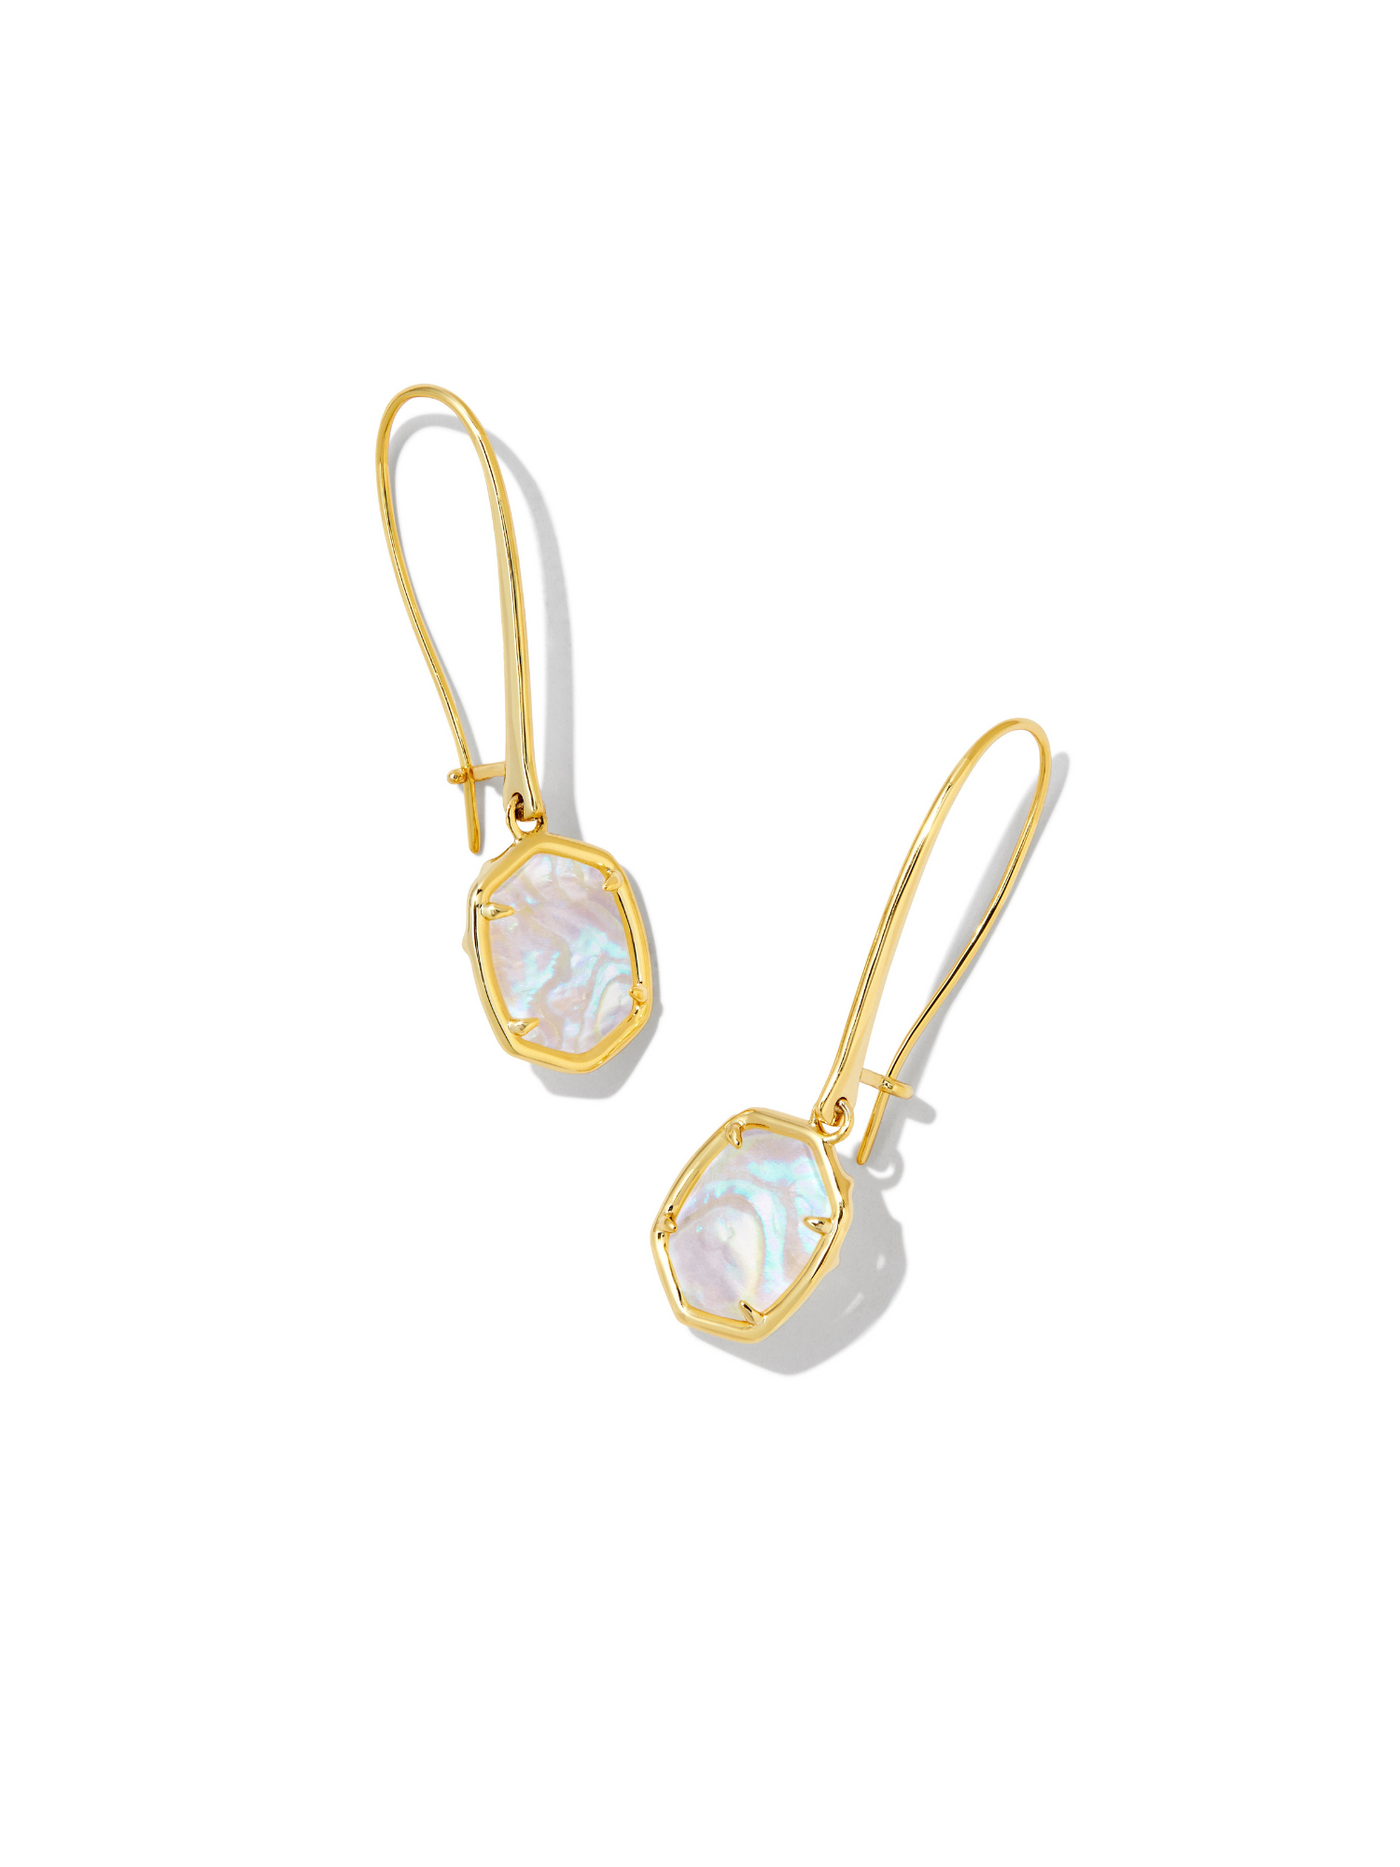 Kendra Scott Daphne Wire Drop Earrings in Gold Iridescent Abalone on white background.